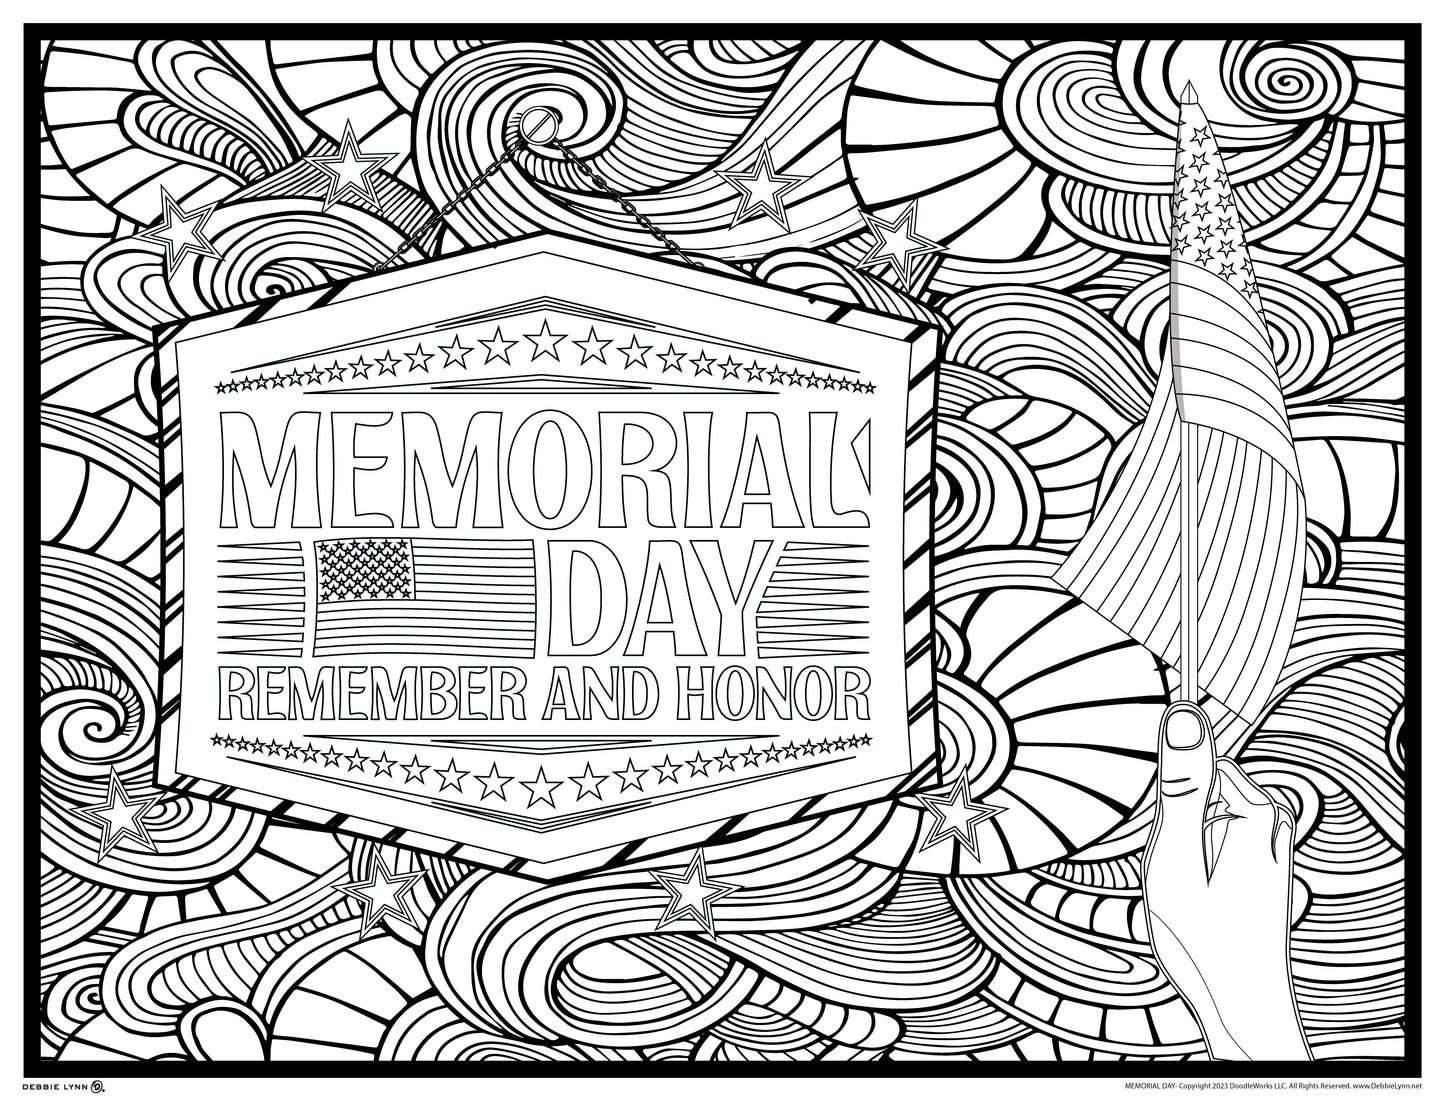 Memorial Day Personalized Giant Coloring Poster